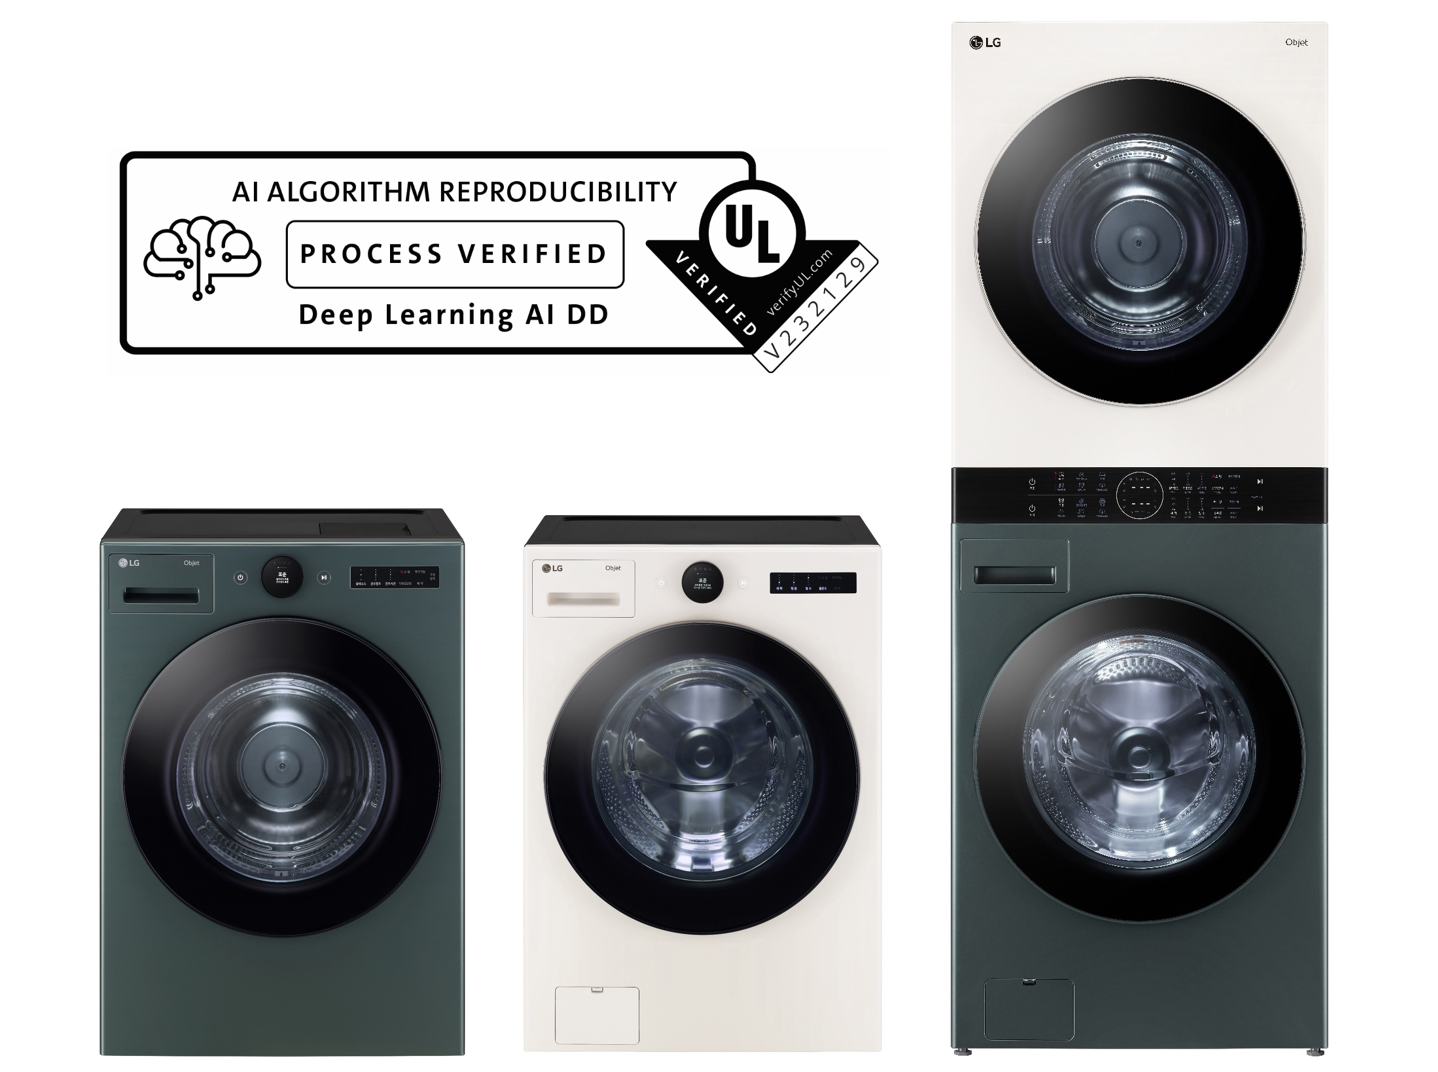 LG Laundry Solutions First in Industry to Receive UL’s AI Algorithm Reproducibility Verification